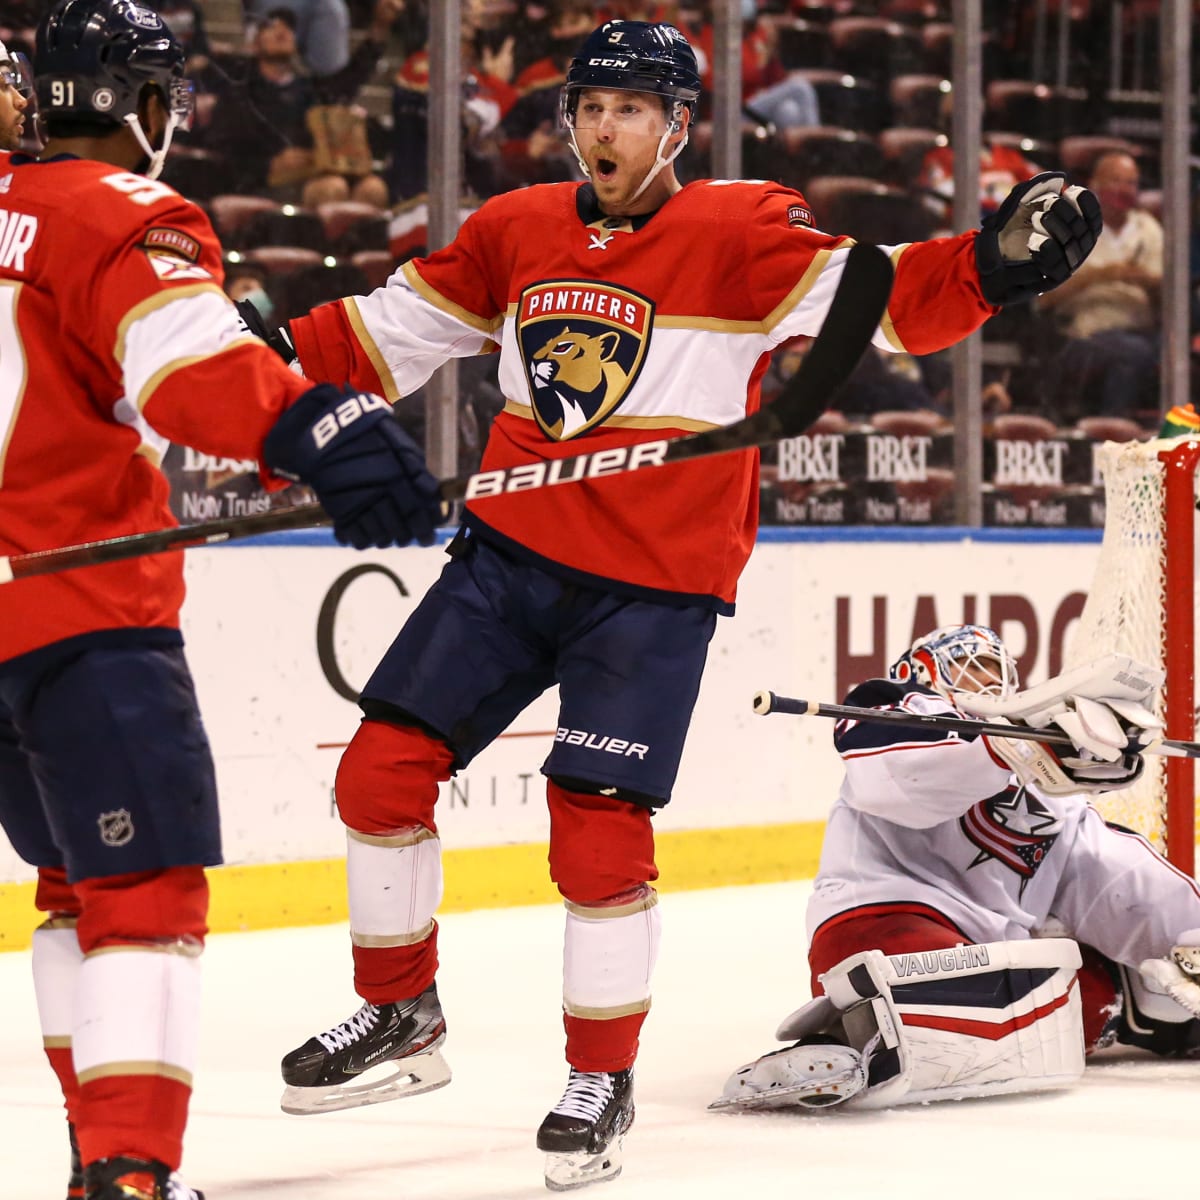 Florida Panther Sam Bennett Adjusting Well to New Home in Sunrise